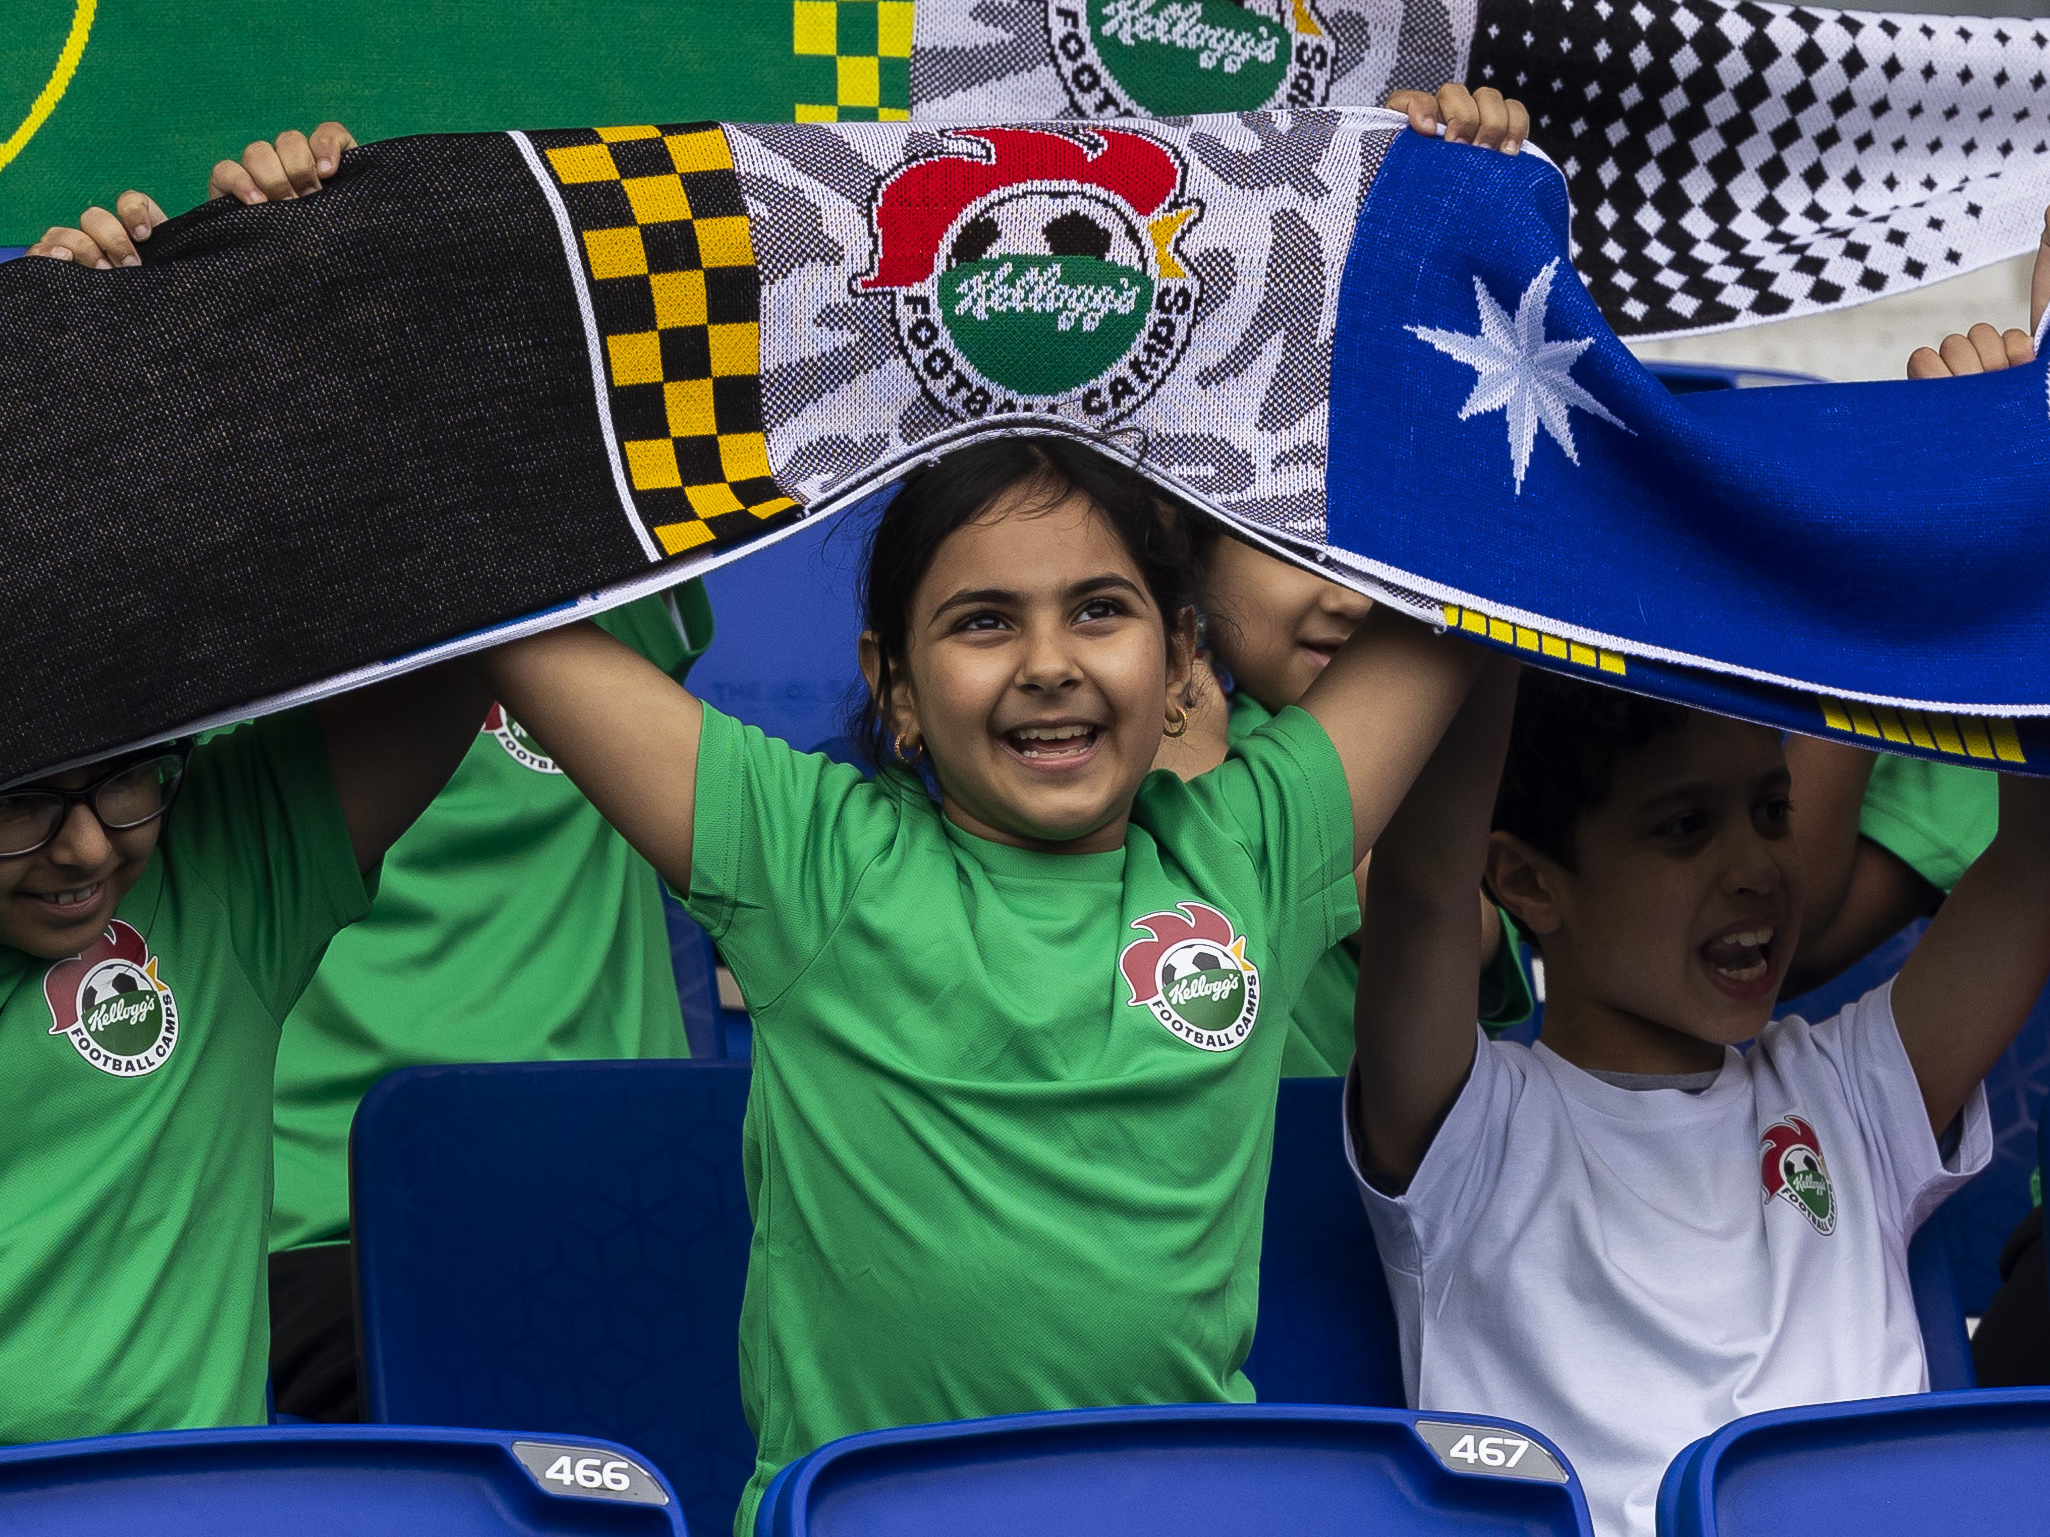 A young girl in a green Kellogg's t-shirt holding up a Kellogg's football scarf 